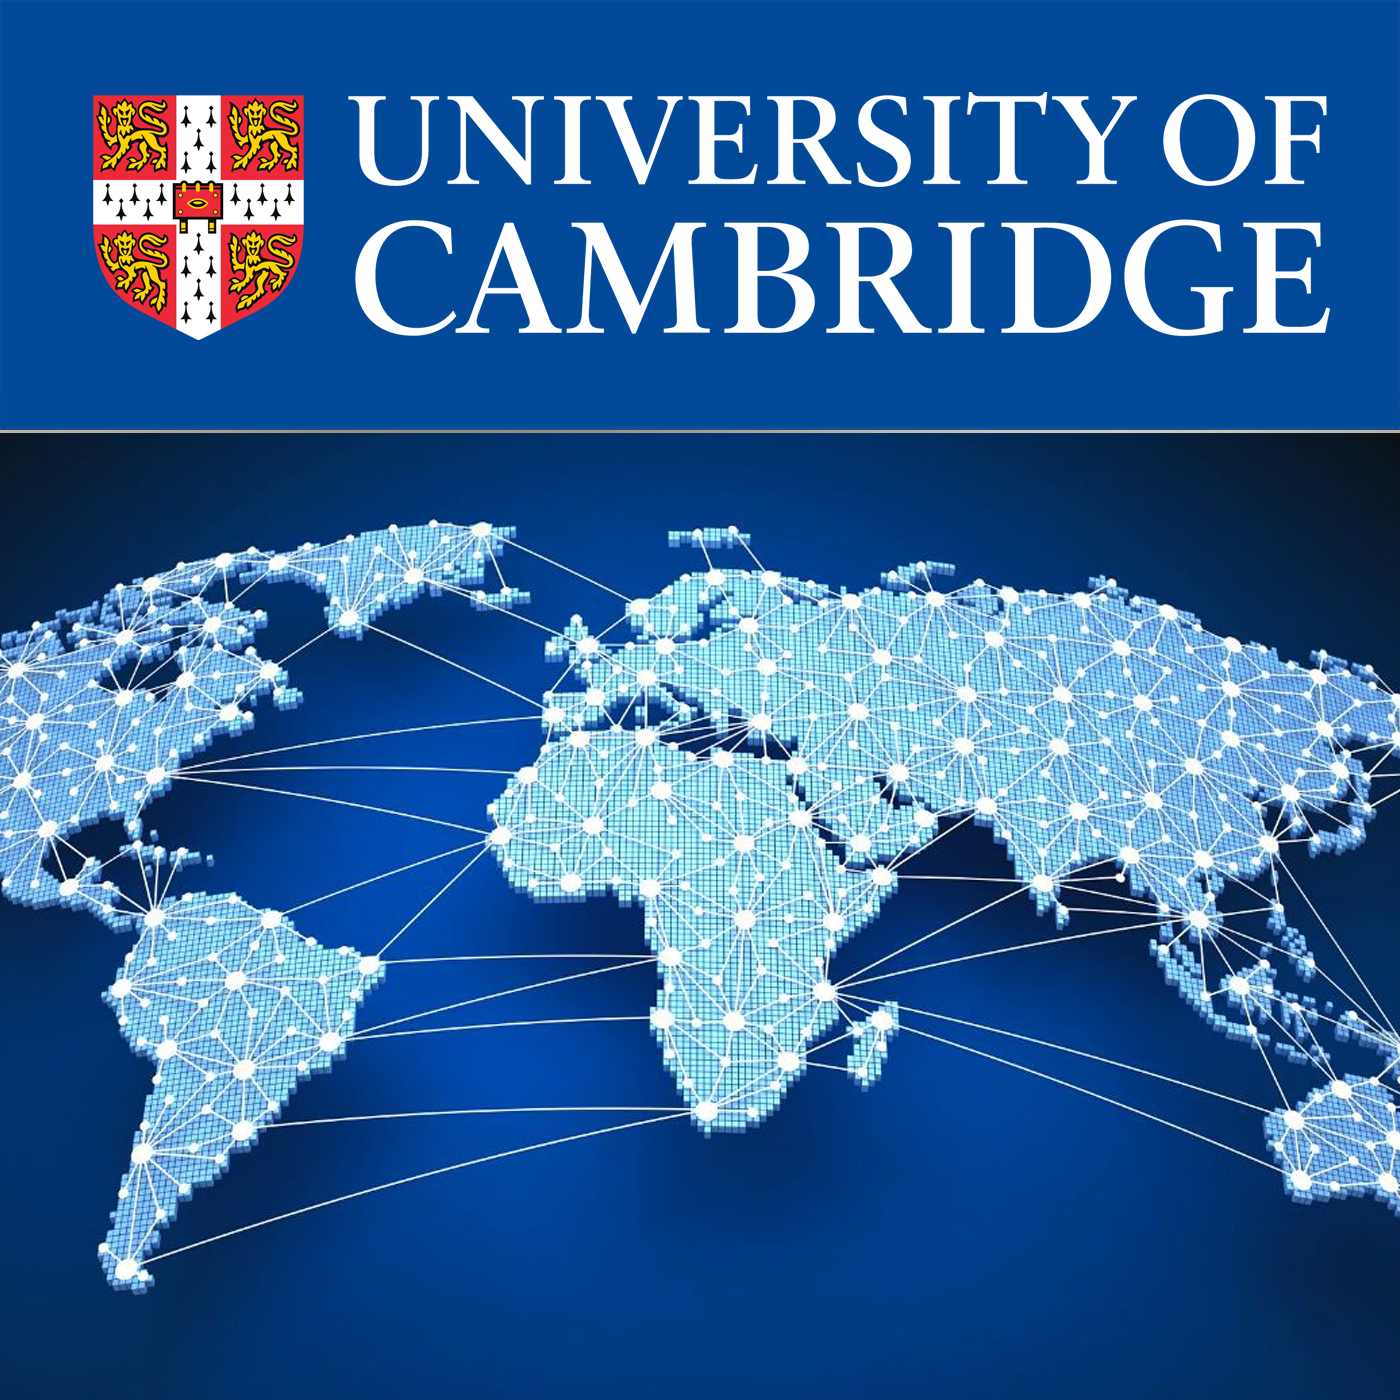 Cambridge International Law Journal 11th Annual Cambridge International Law Conference: 'Strengthening Global Governance through International Law: Challenges and Opportunities''s image